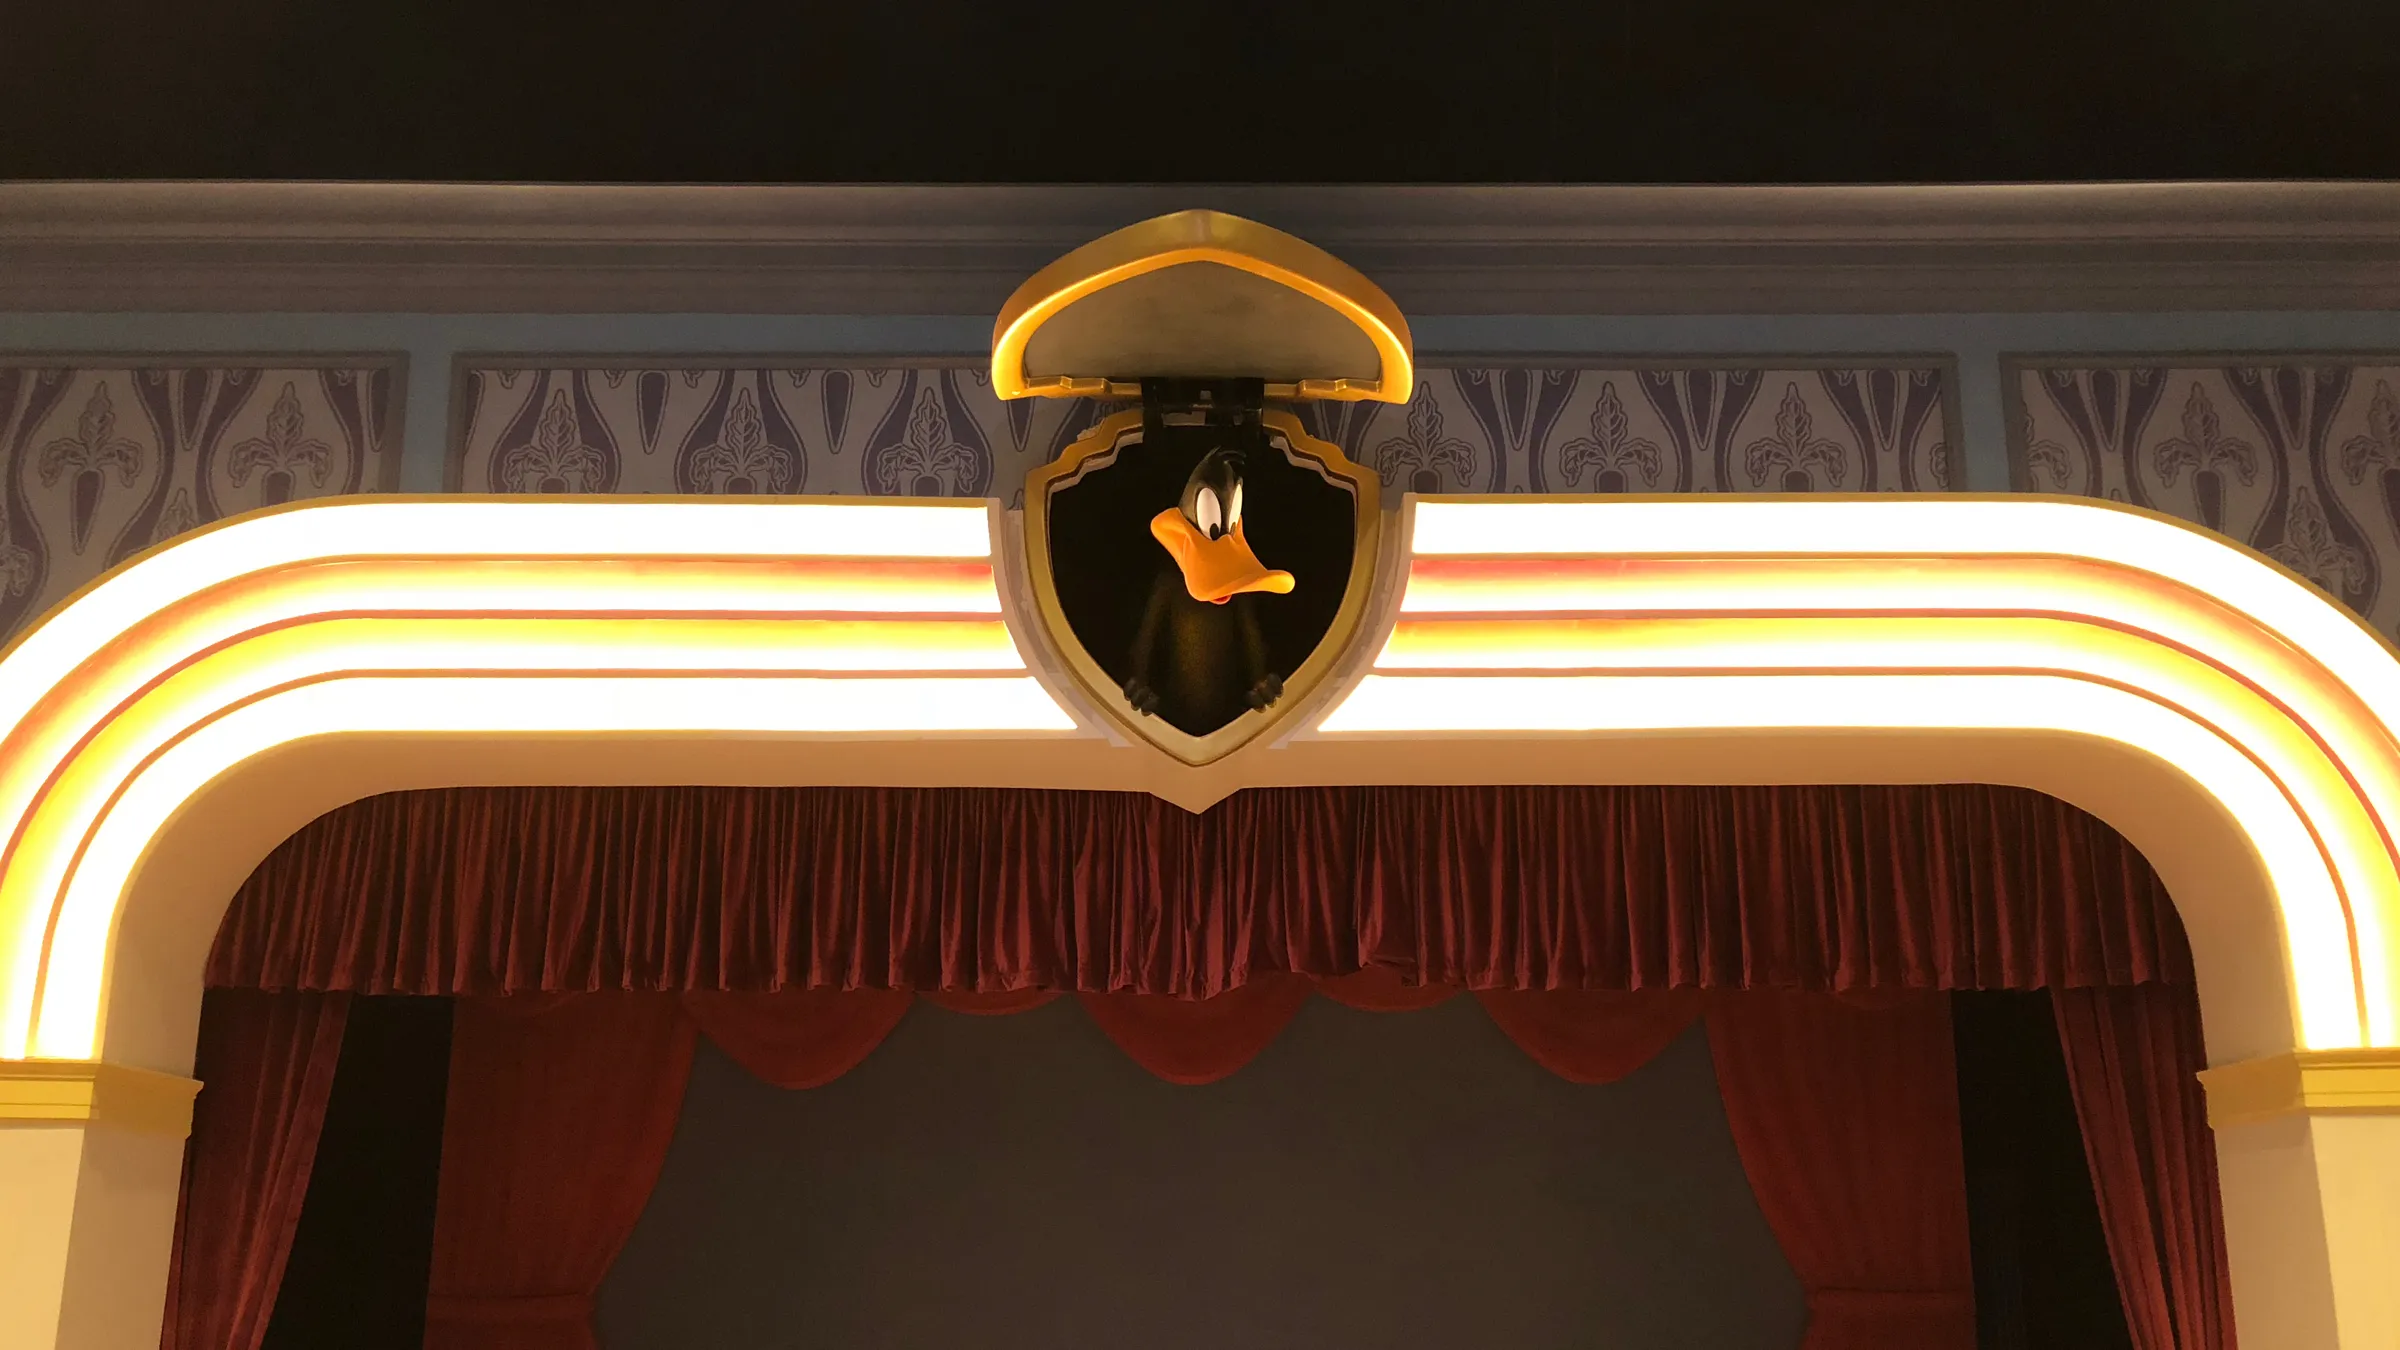 Daffy Duck figure overlooking an archway